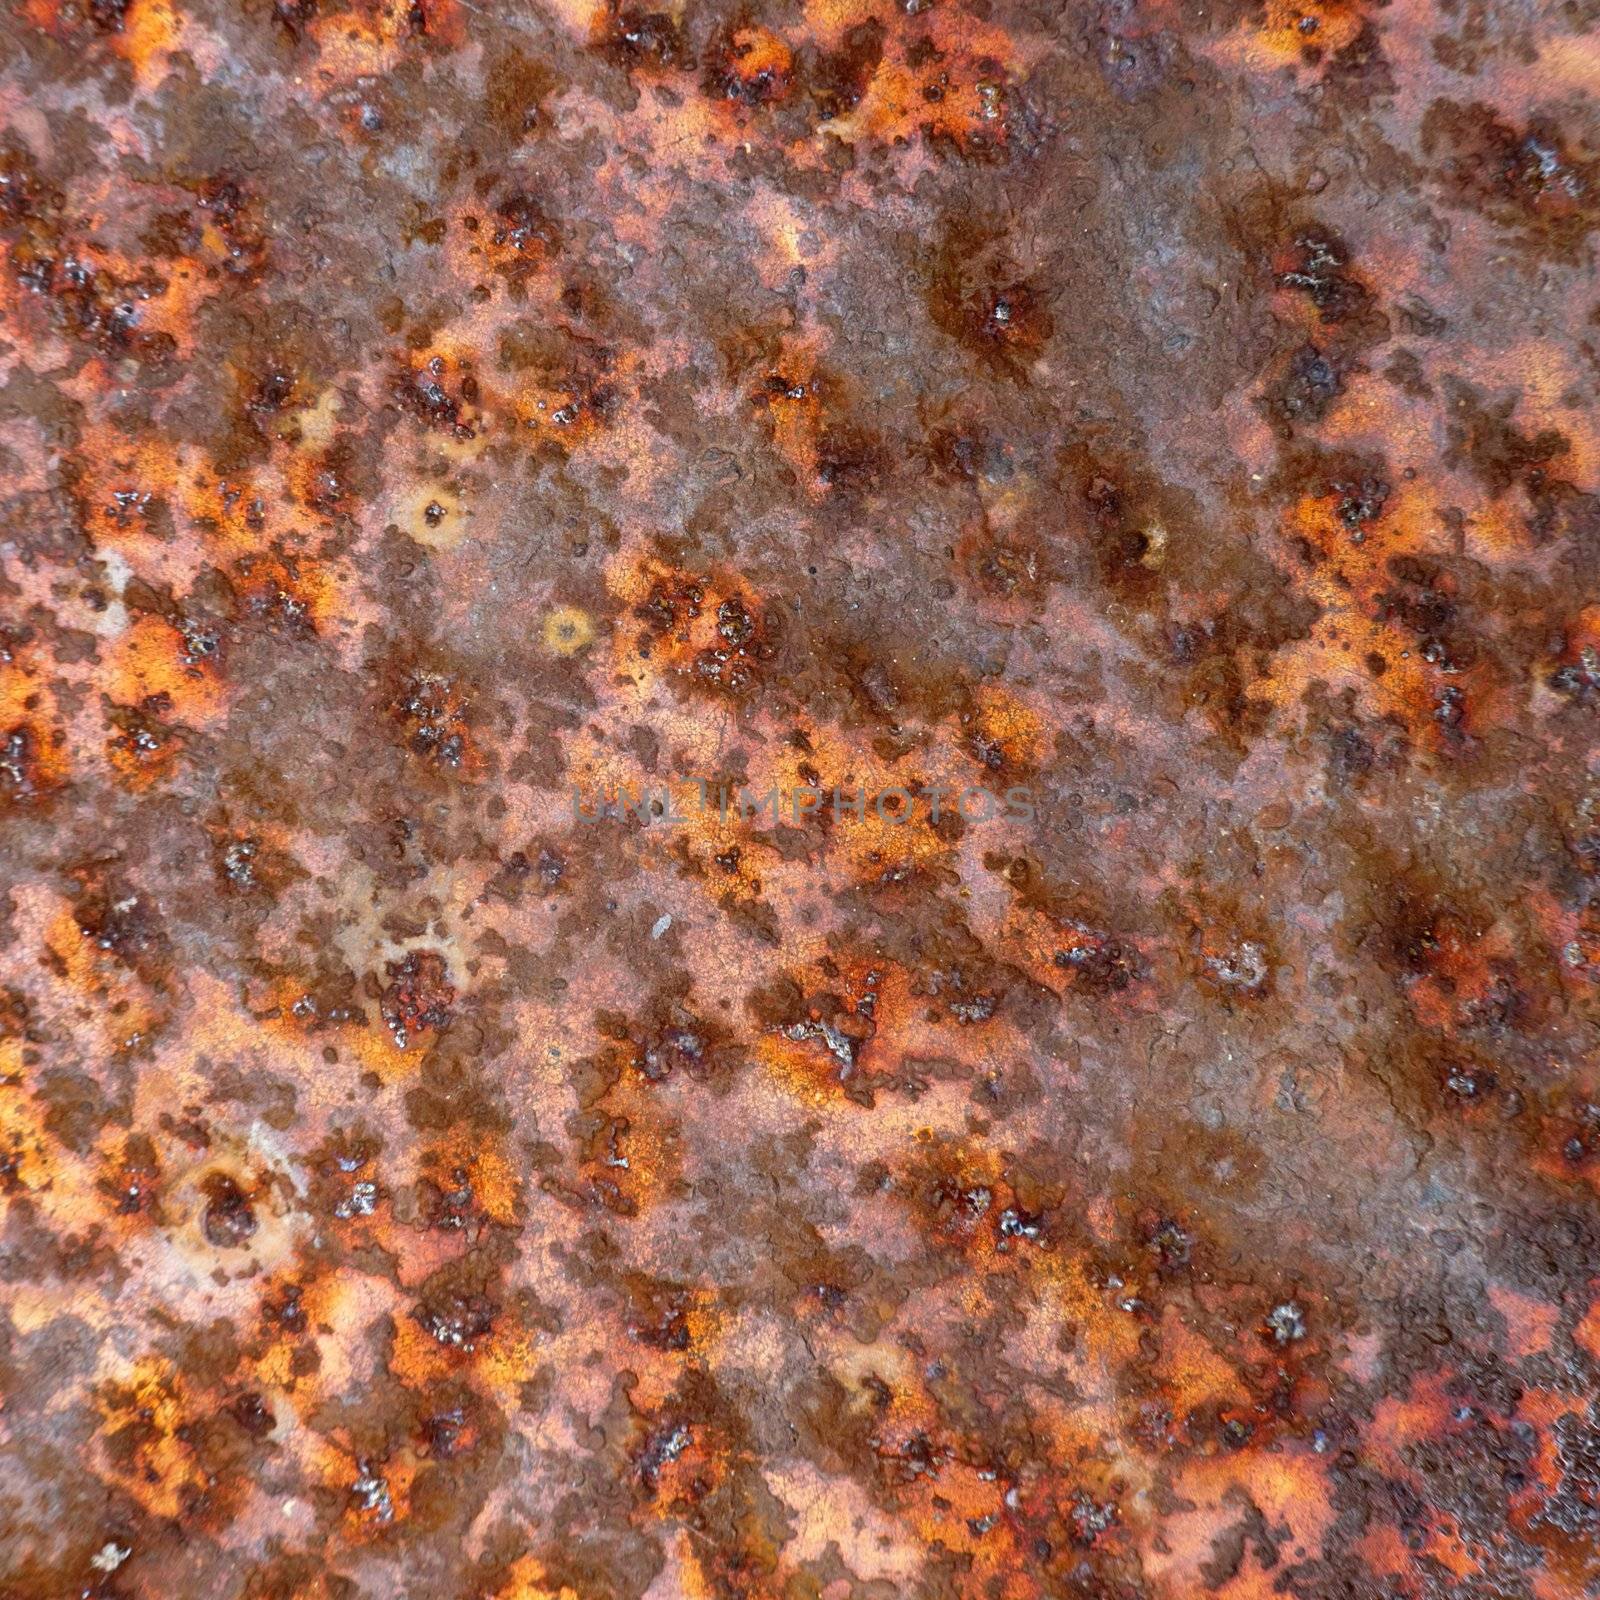 Grunge, old, rusty surface of metal